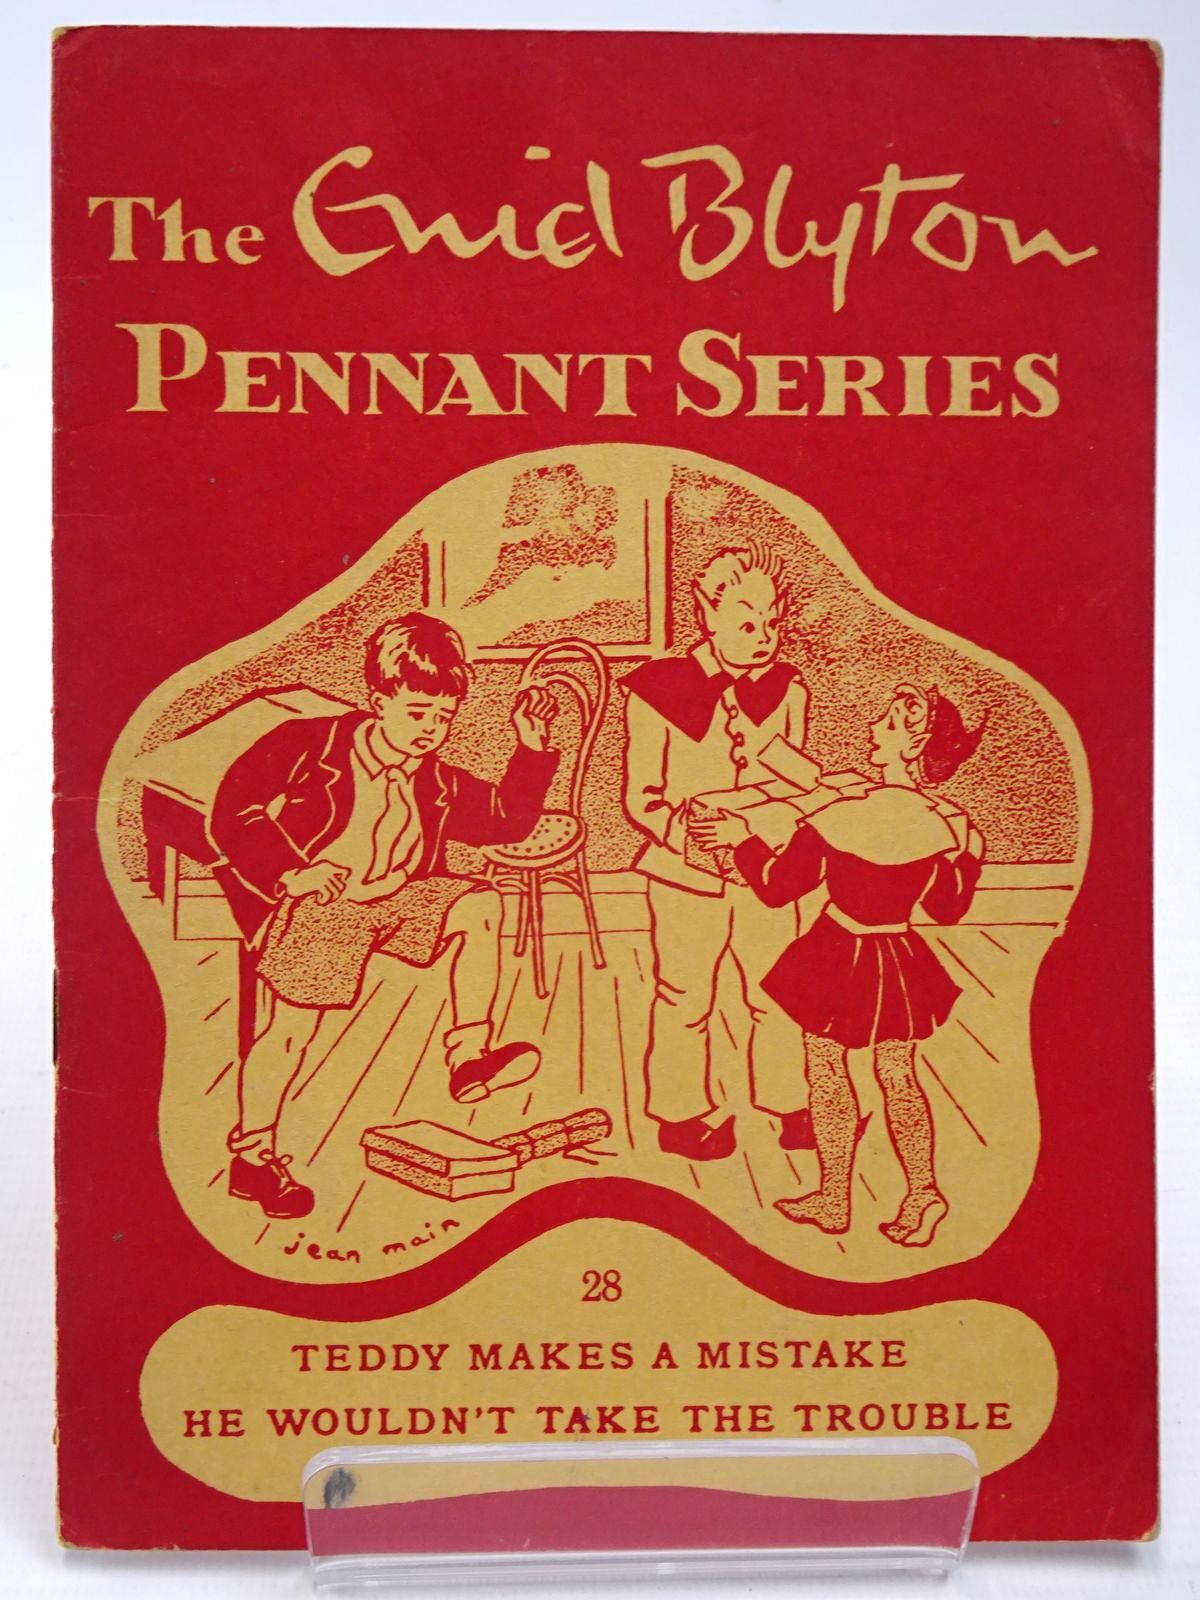 Photo of THE ENID BLYTON PENNANT SERIES No. 28 TEDDY MAKES A MISTAKE / HE WOULDN'T TAKE THE TROUBLE written by Blyton, Enid illustrated by Soper, Eileen Main, Jean published by Macmillan &amp; Co. Ltd. (STOCK CODE: 2130526)  for sale by Stella & Rose's Books